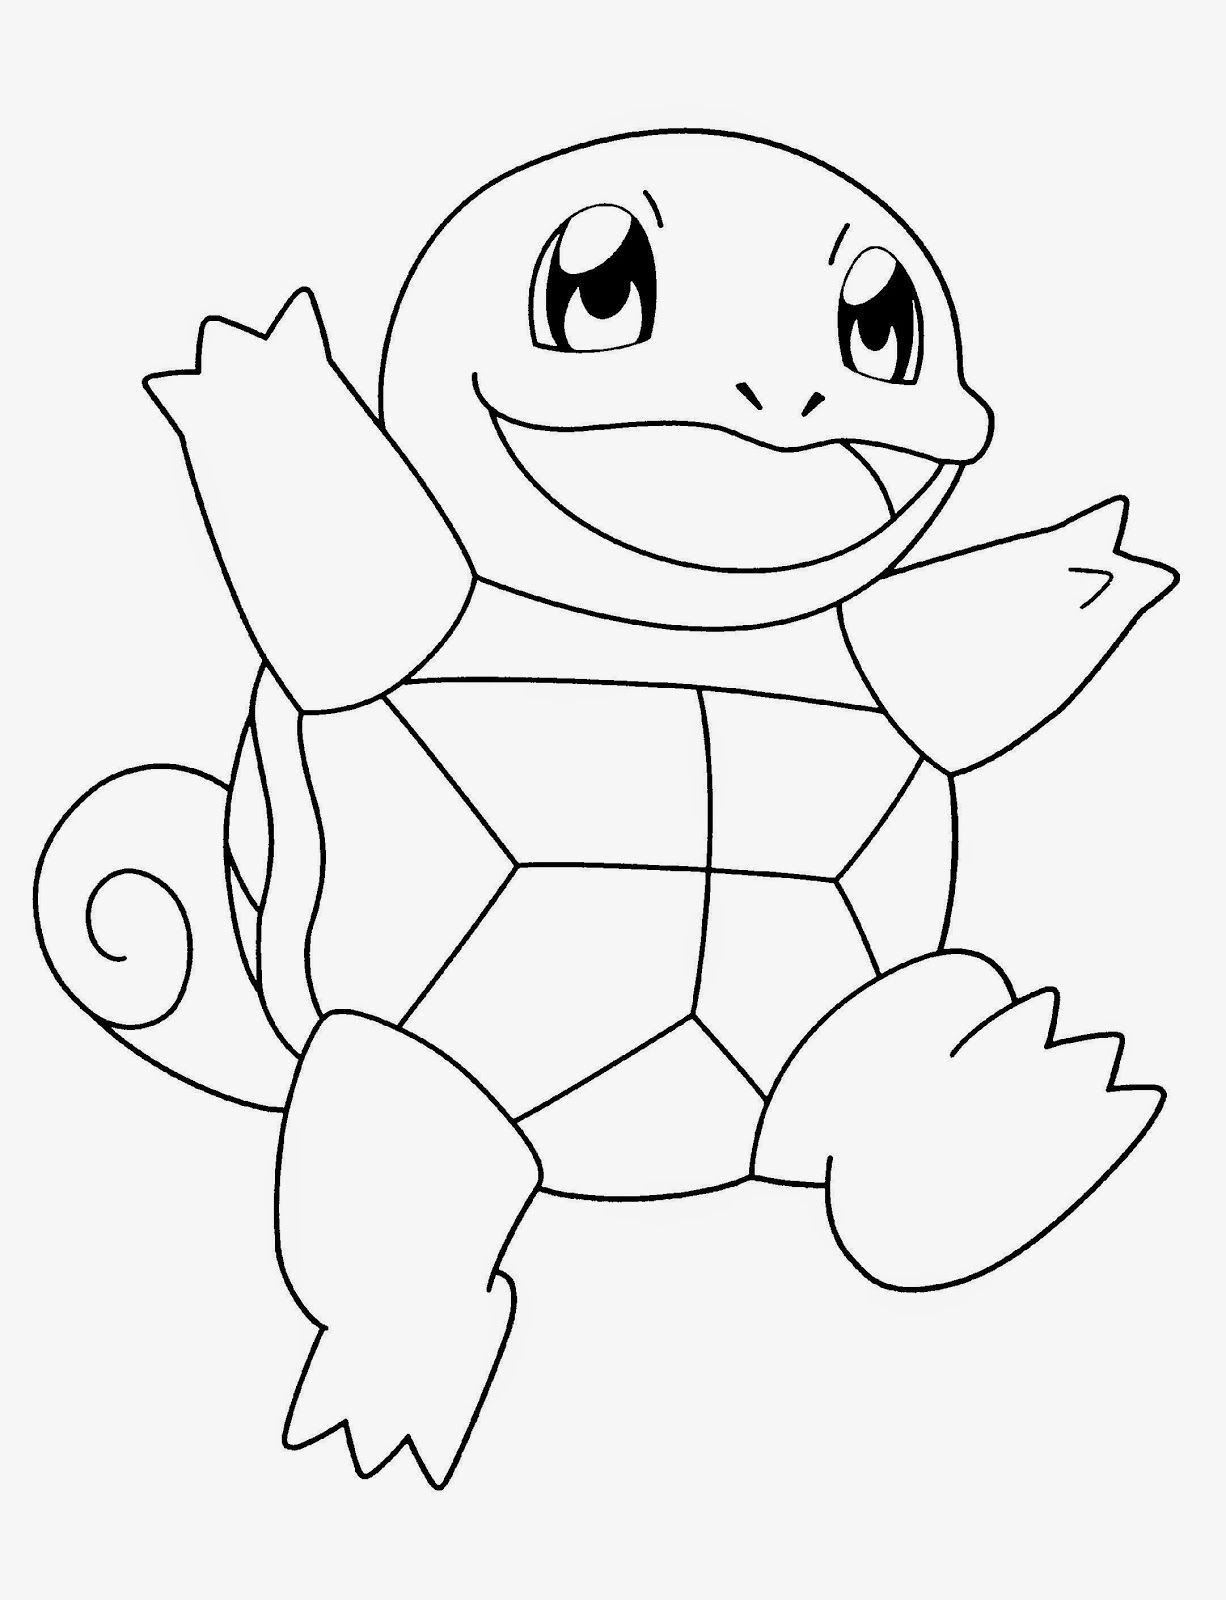 Pokemon Coloring Pages | Free Coloring Sheet